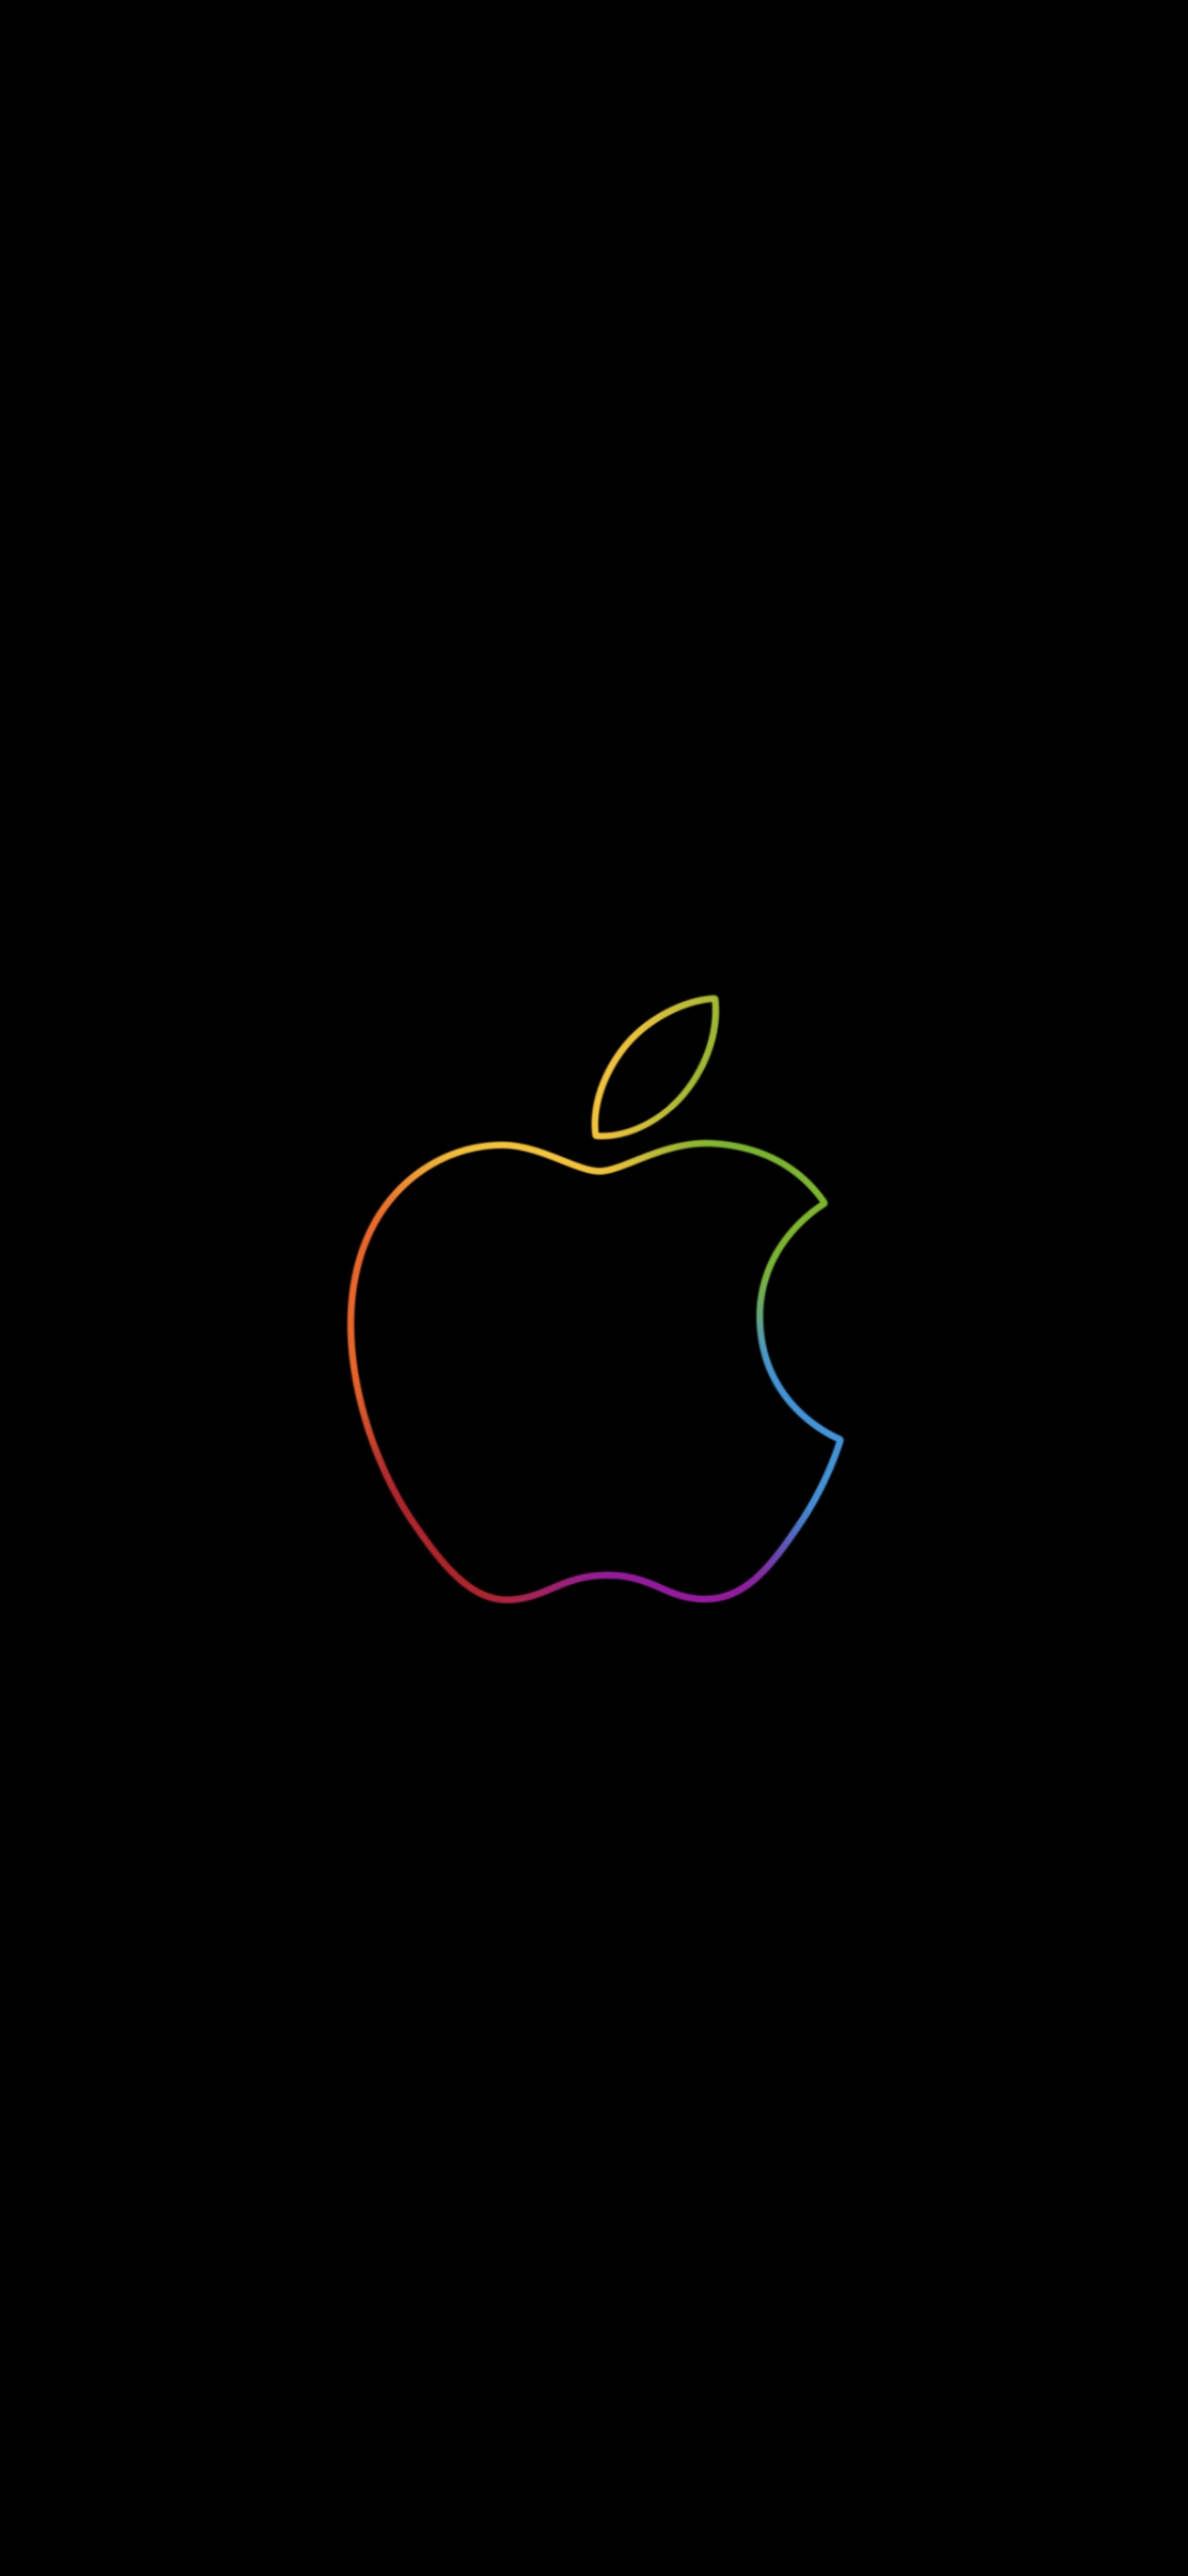 Apple Event - Rainbow Logo - Static Version ( Event) - Wallpapers Central